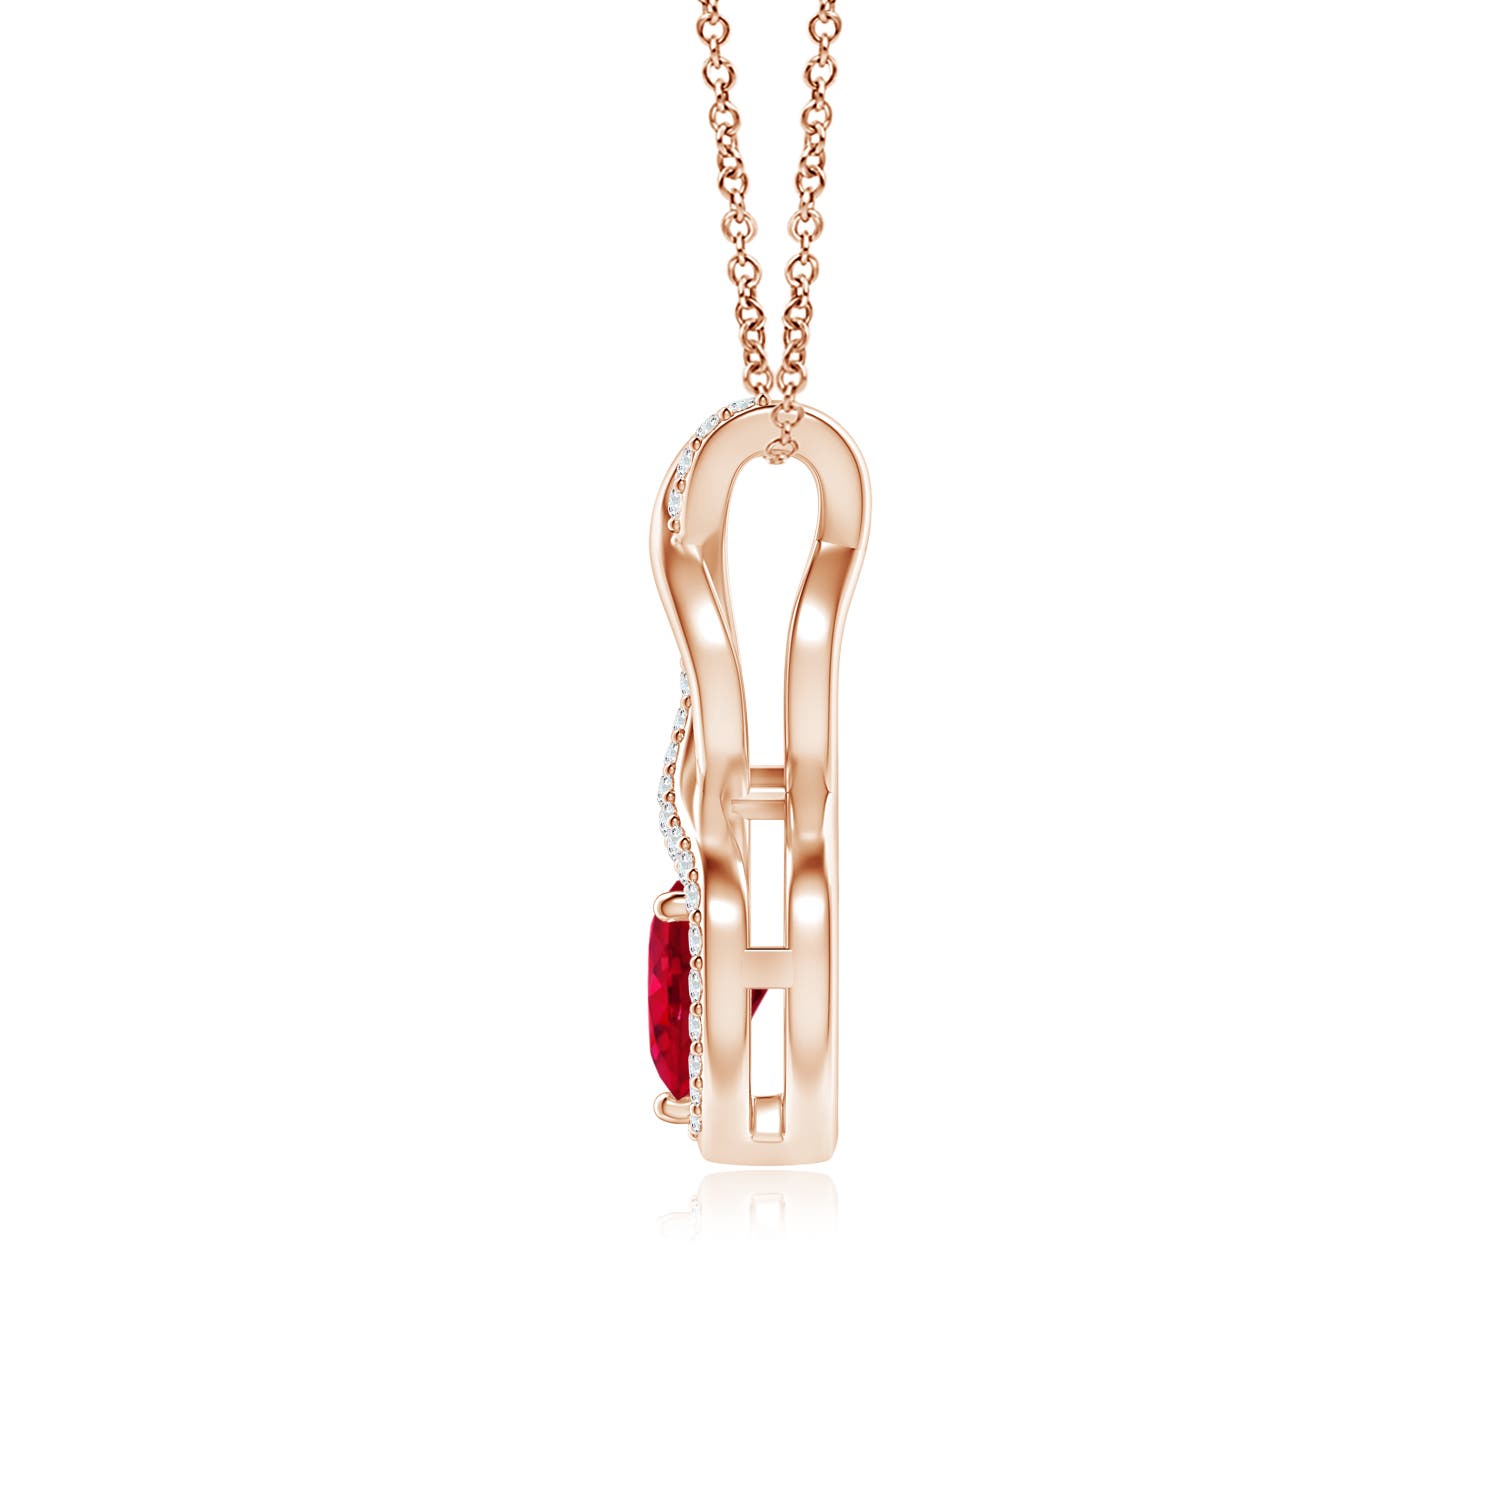 AAA - Ruby / 0.61 CT / 14 KT Rose Gold